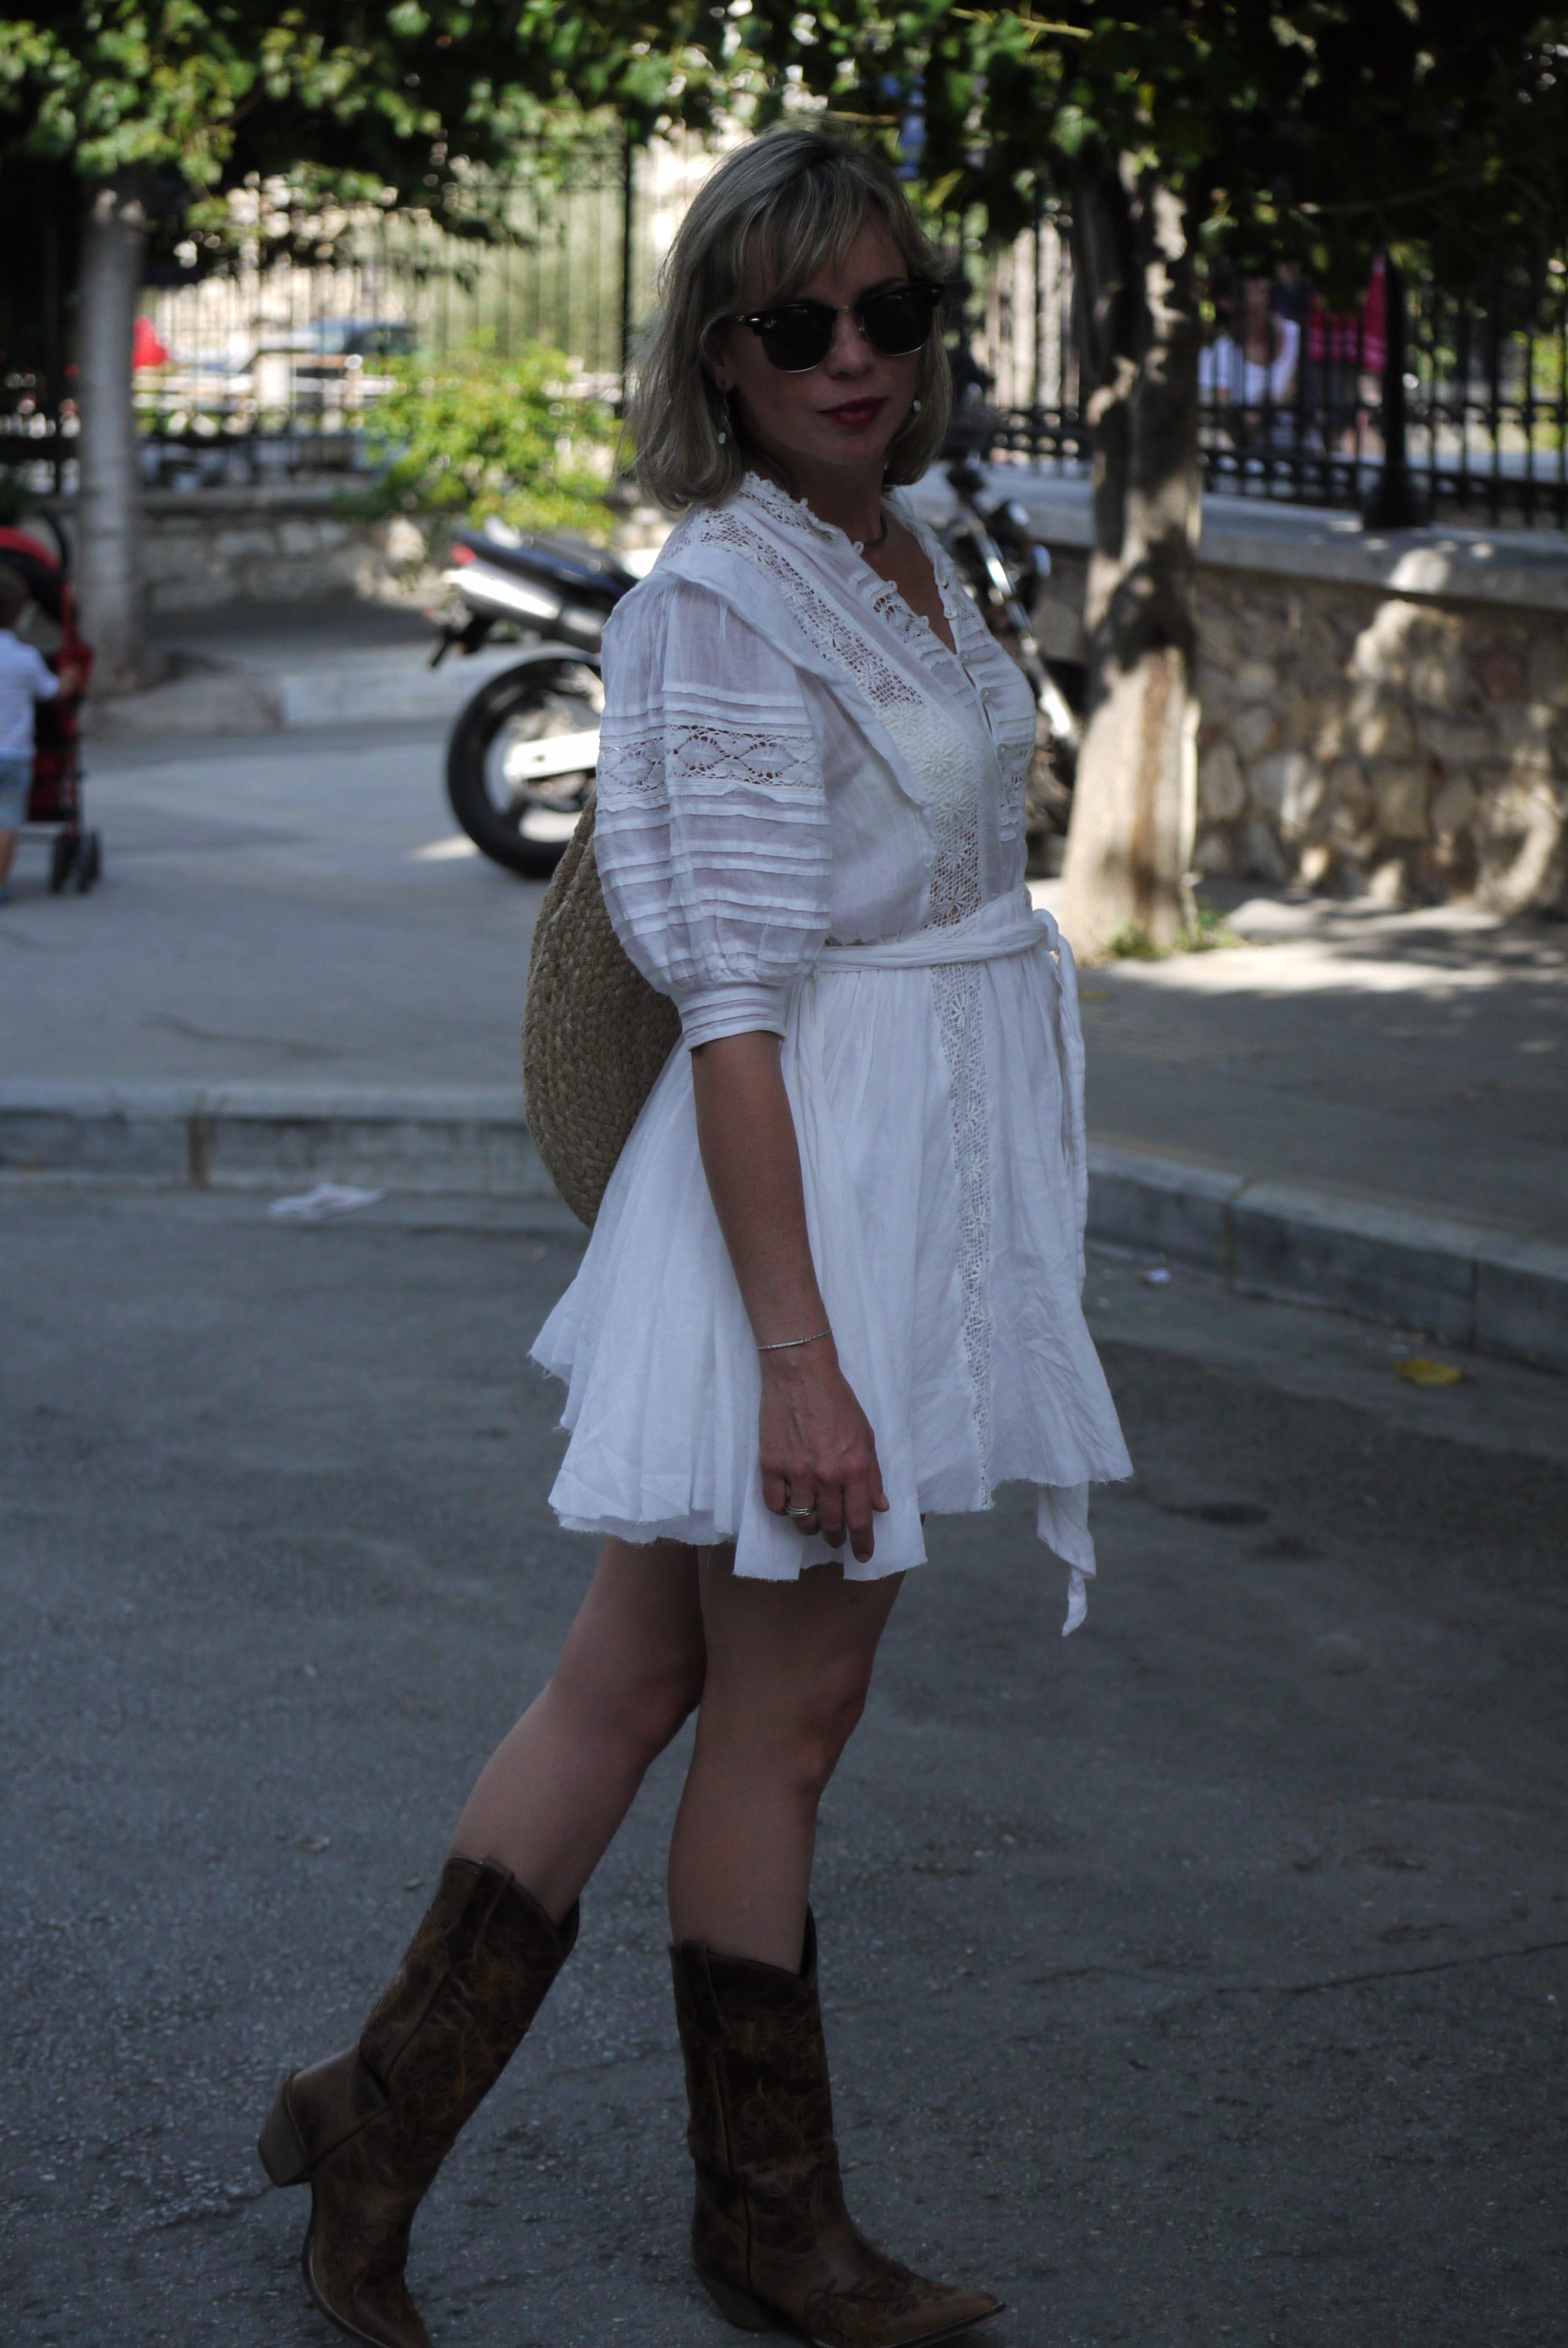 Alba Marina Otero fashion blogger from Mylovelypeople blog shares with you the diferents kind of activities to do in Miami during these days and how to dress for a Festival with a white mini dress paired with cowboy boots and a braided bag.